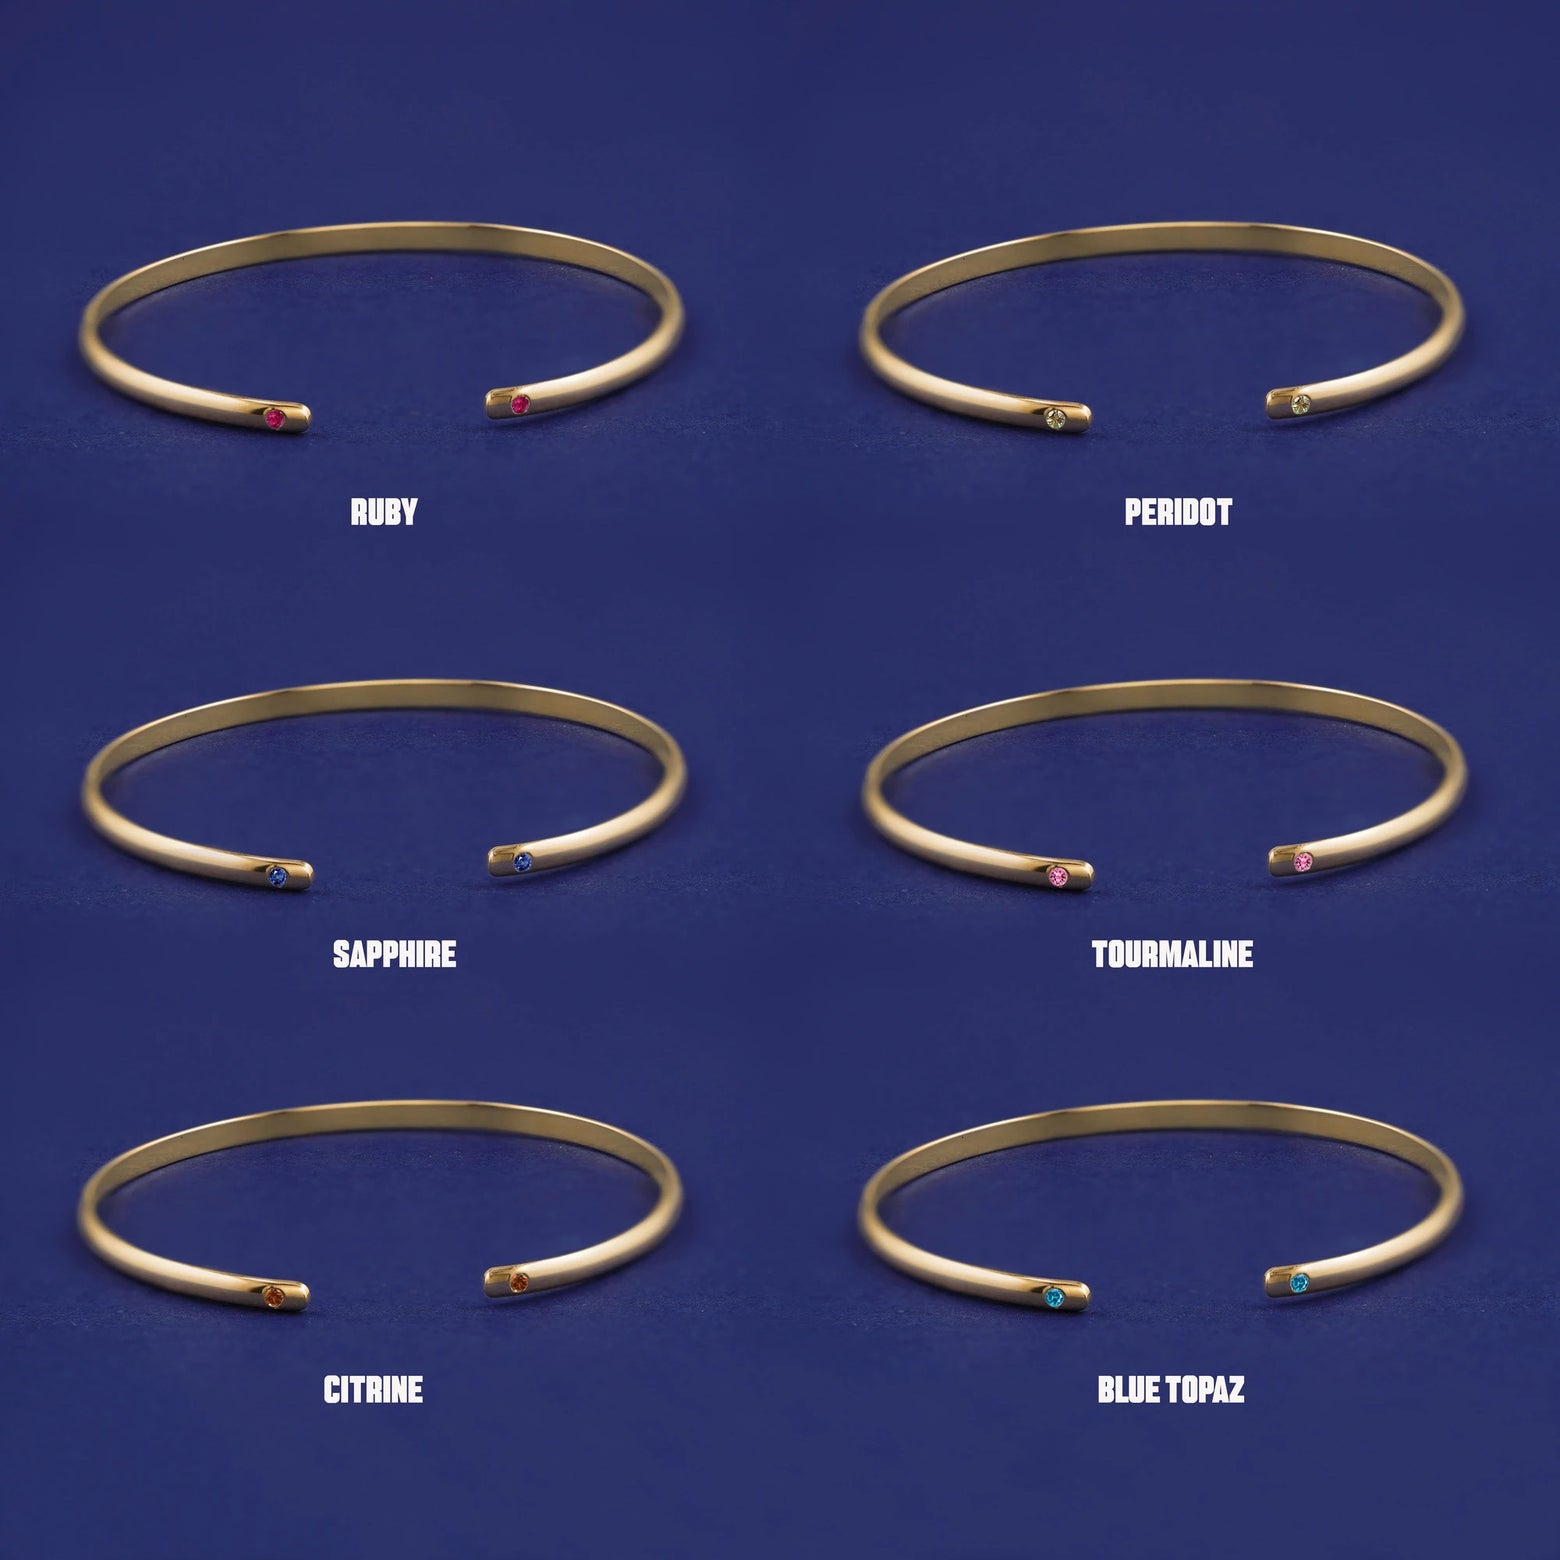 Six versions of the solid yellow gold Gemstone Open Bangle showing 6 different birthstone options